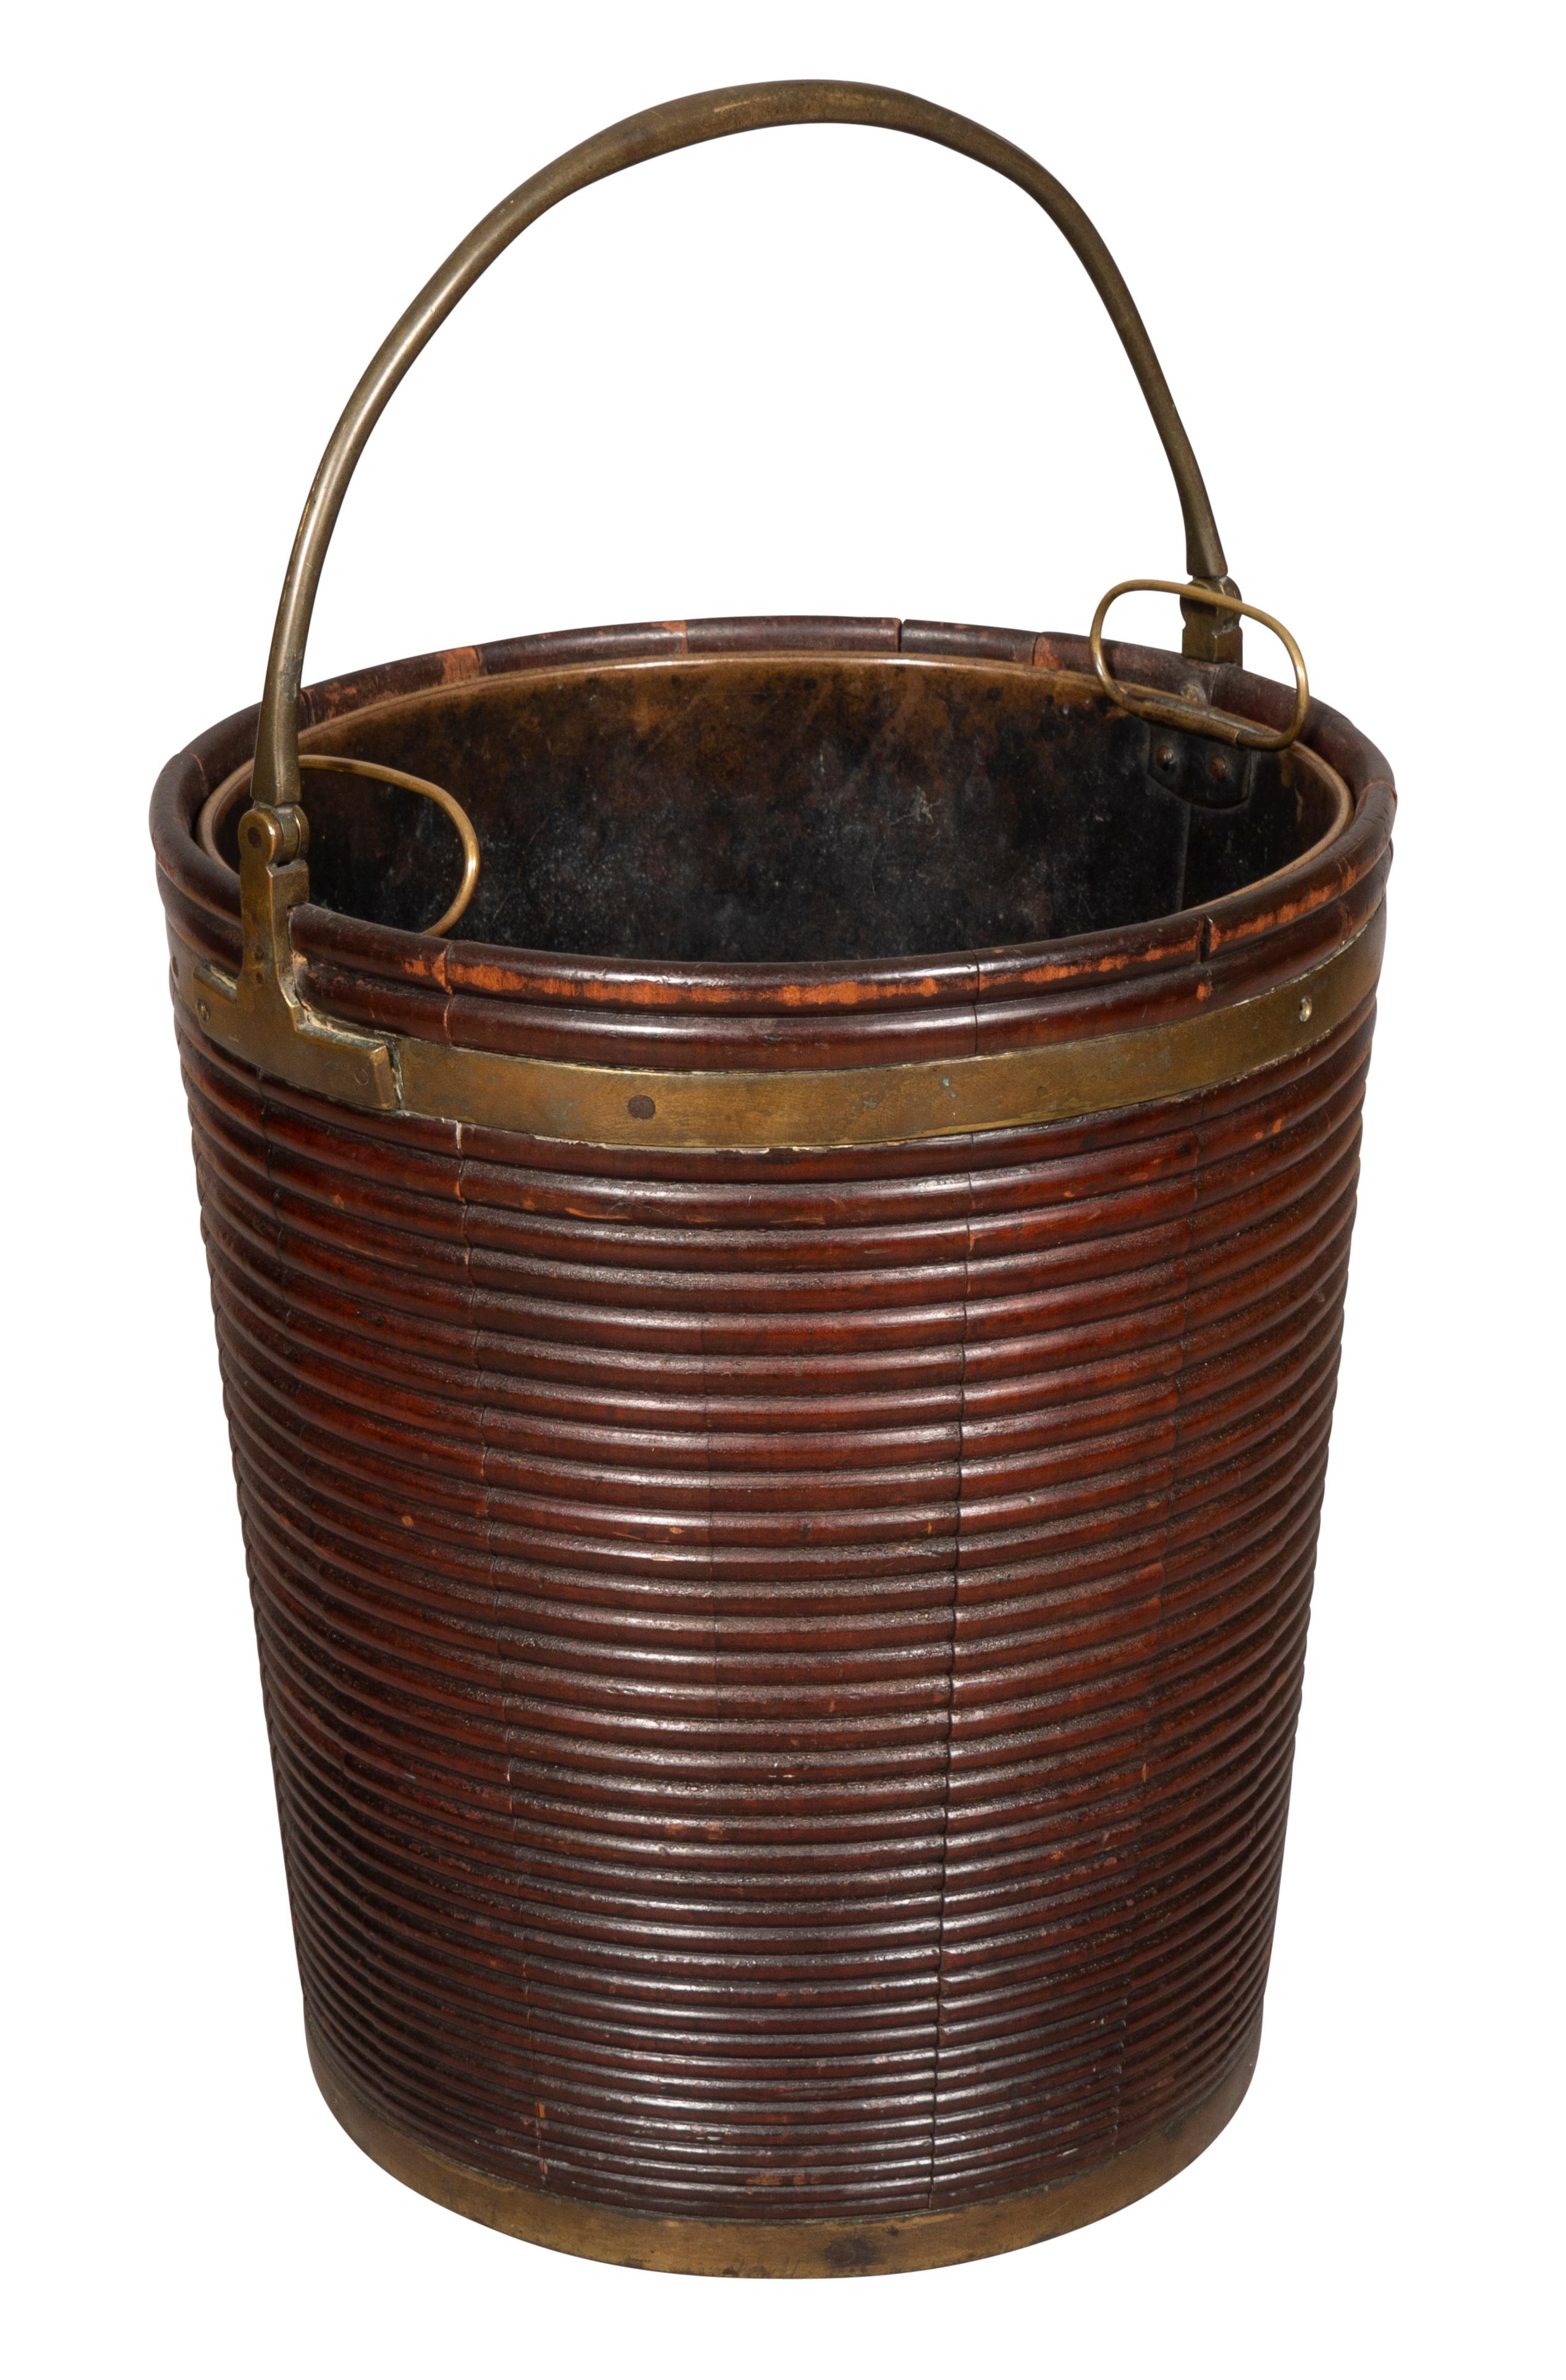 Circular ribbed tapered body with brass liner and brass bail handle.